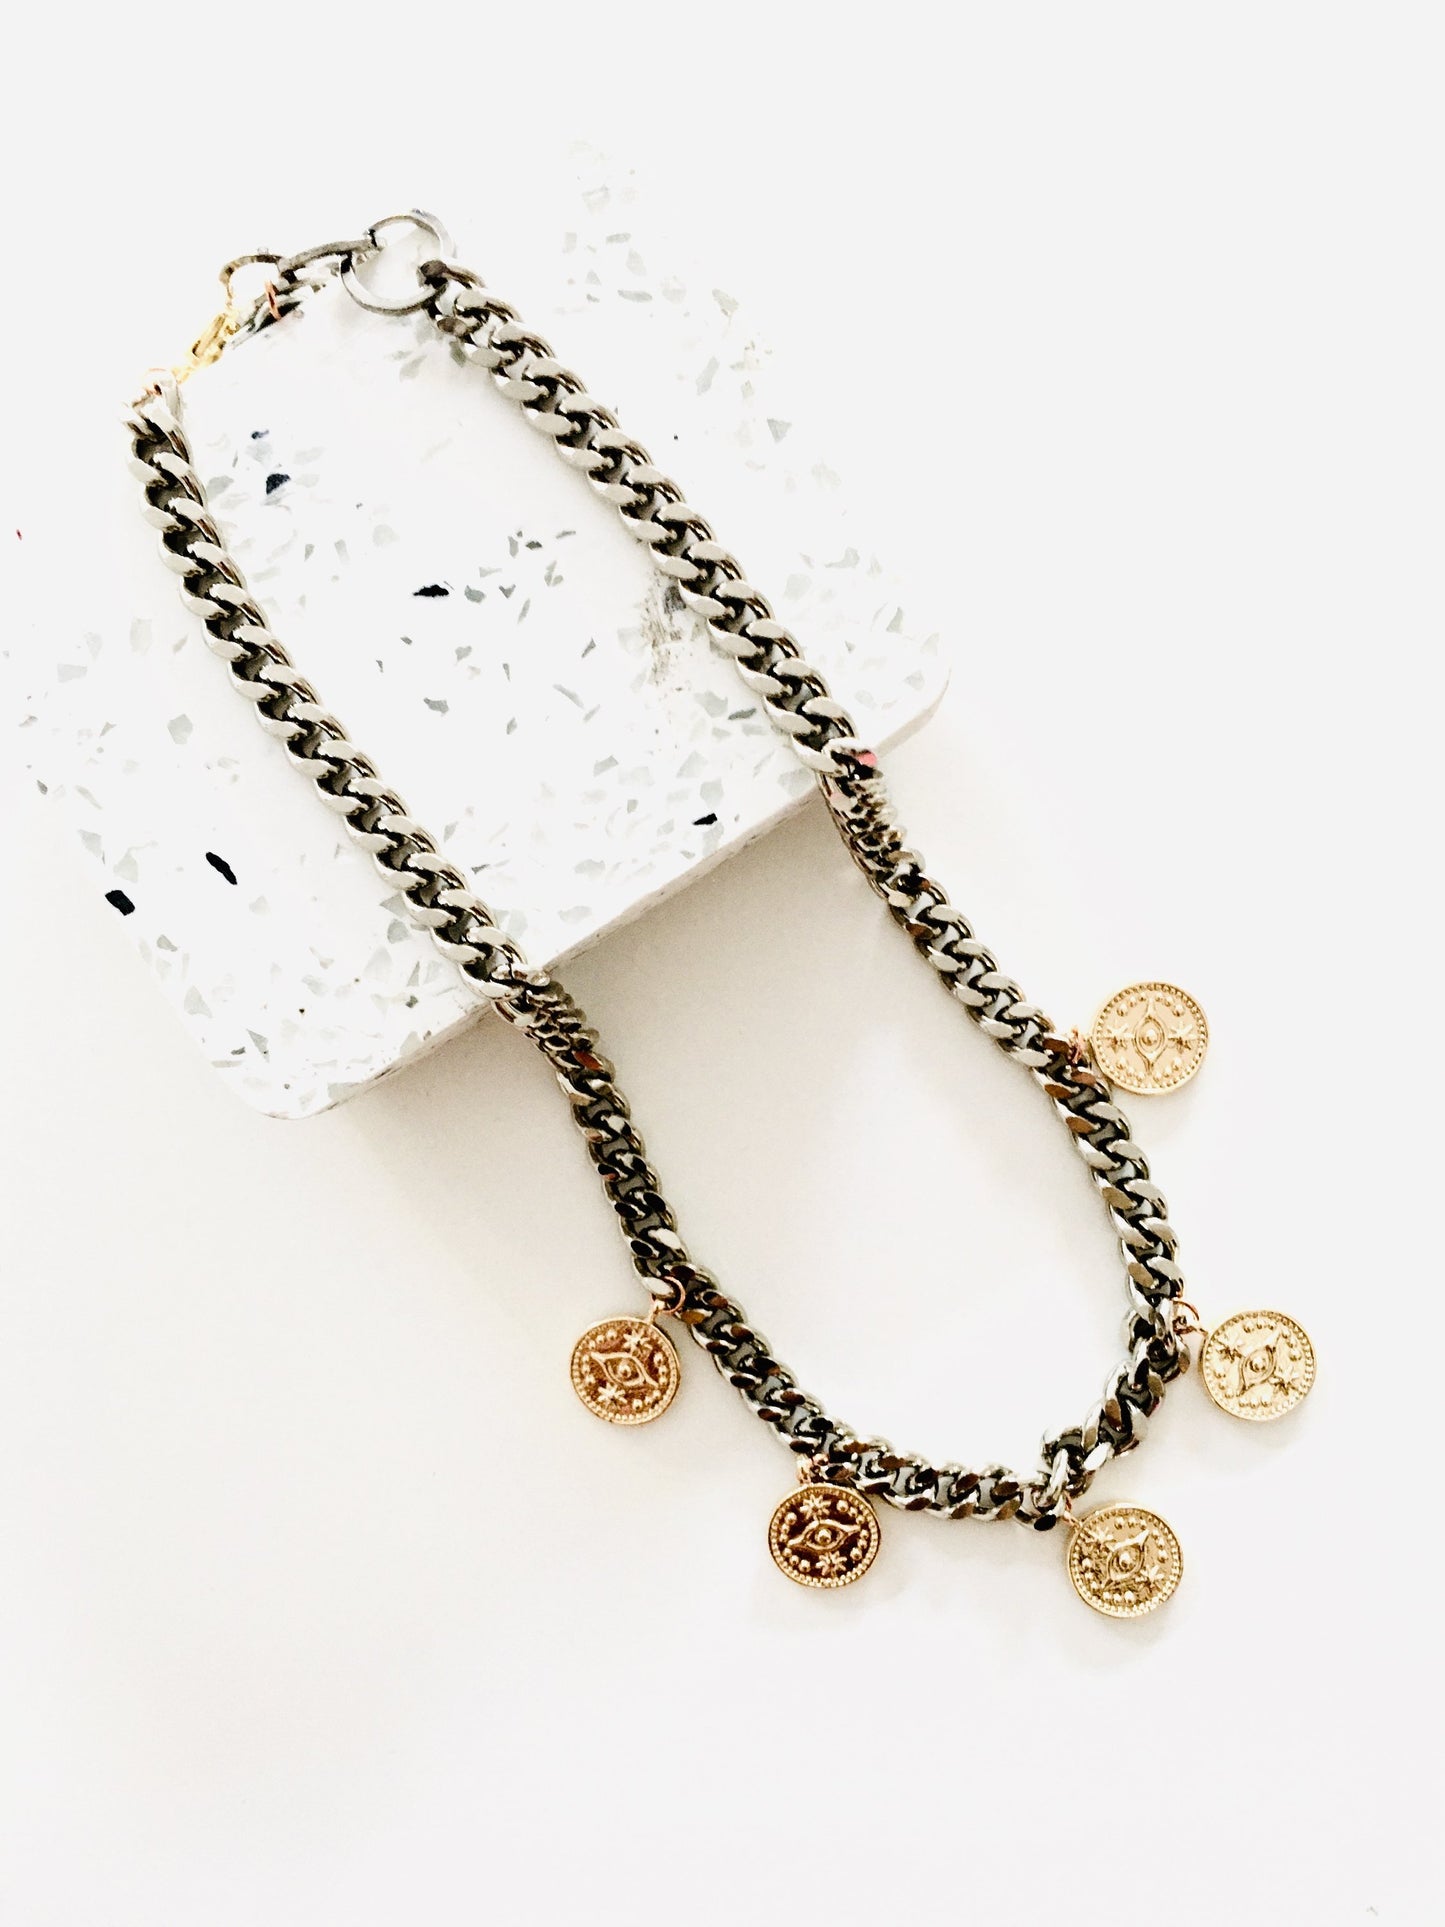 Evil Eye Coins Necklace in Gold and Silver.